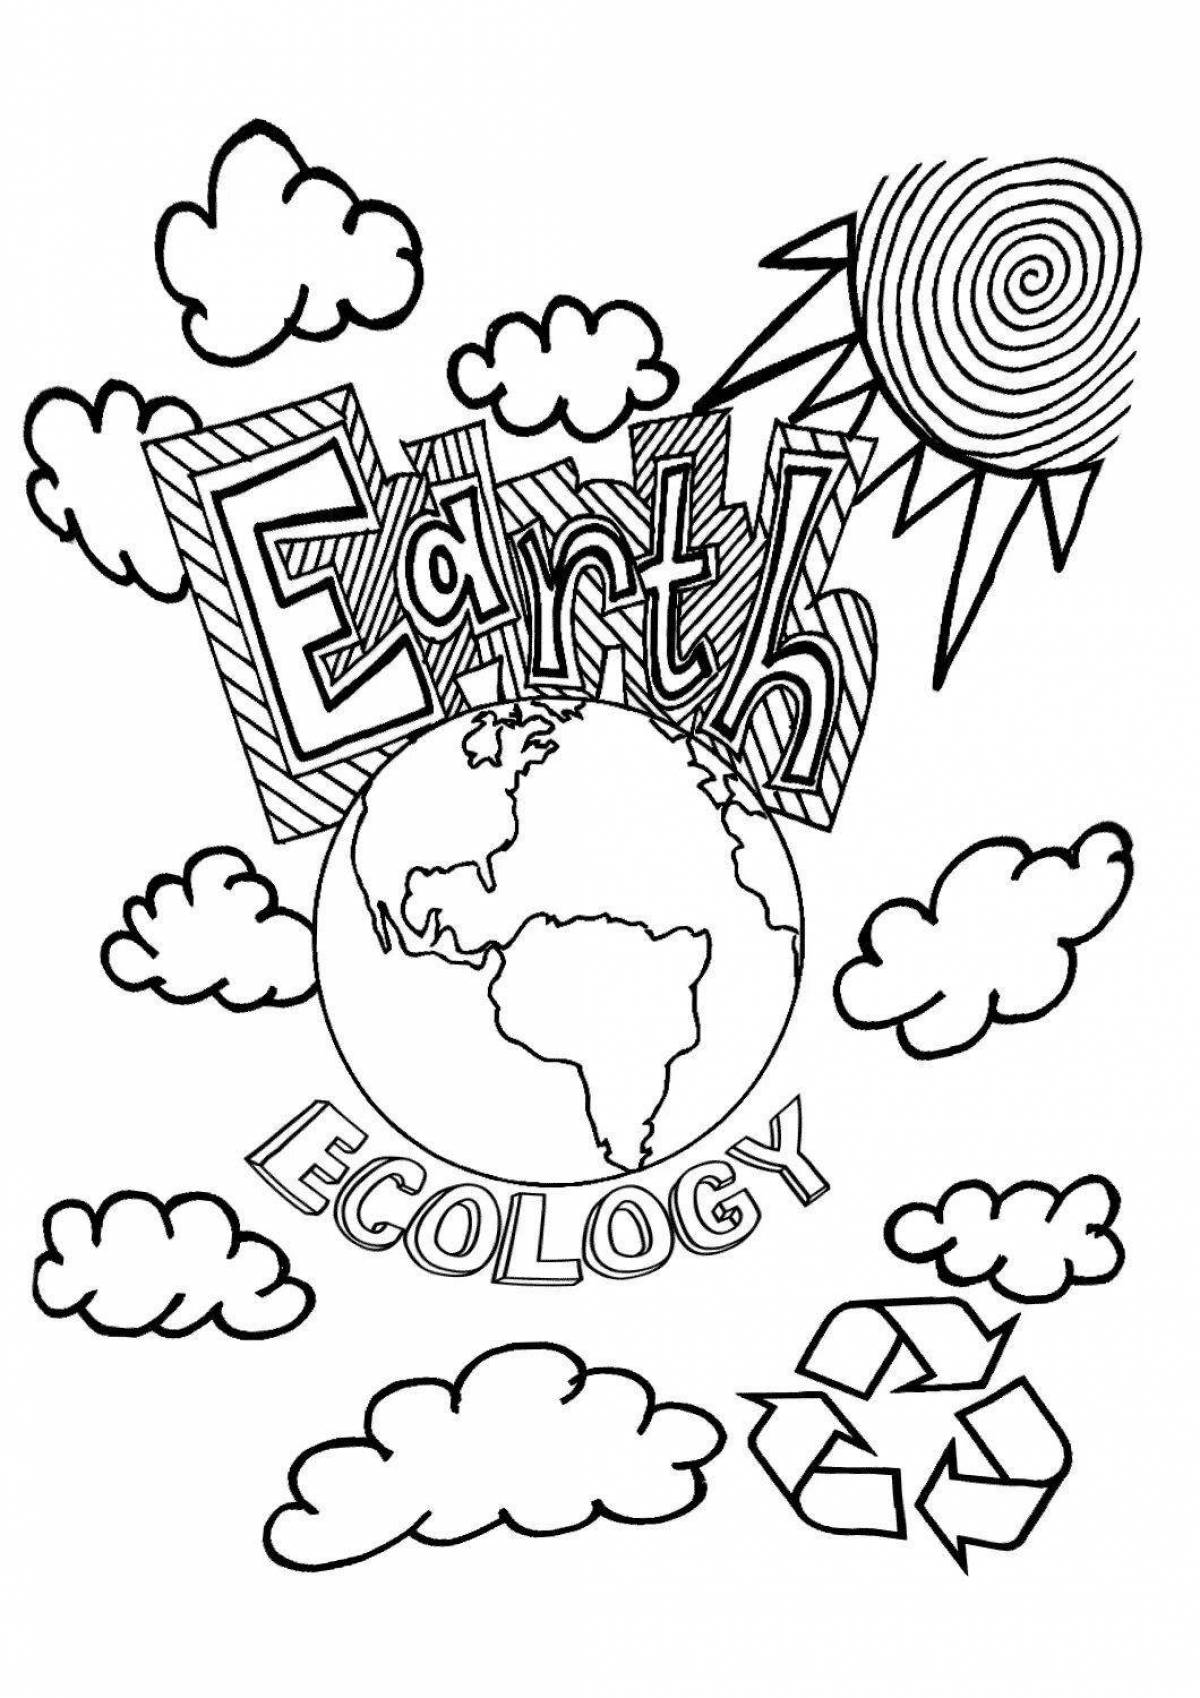 Living ecological drawing